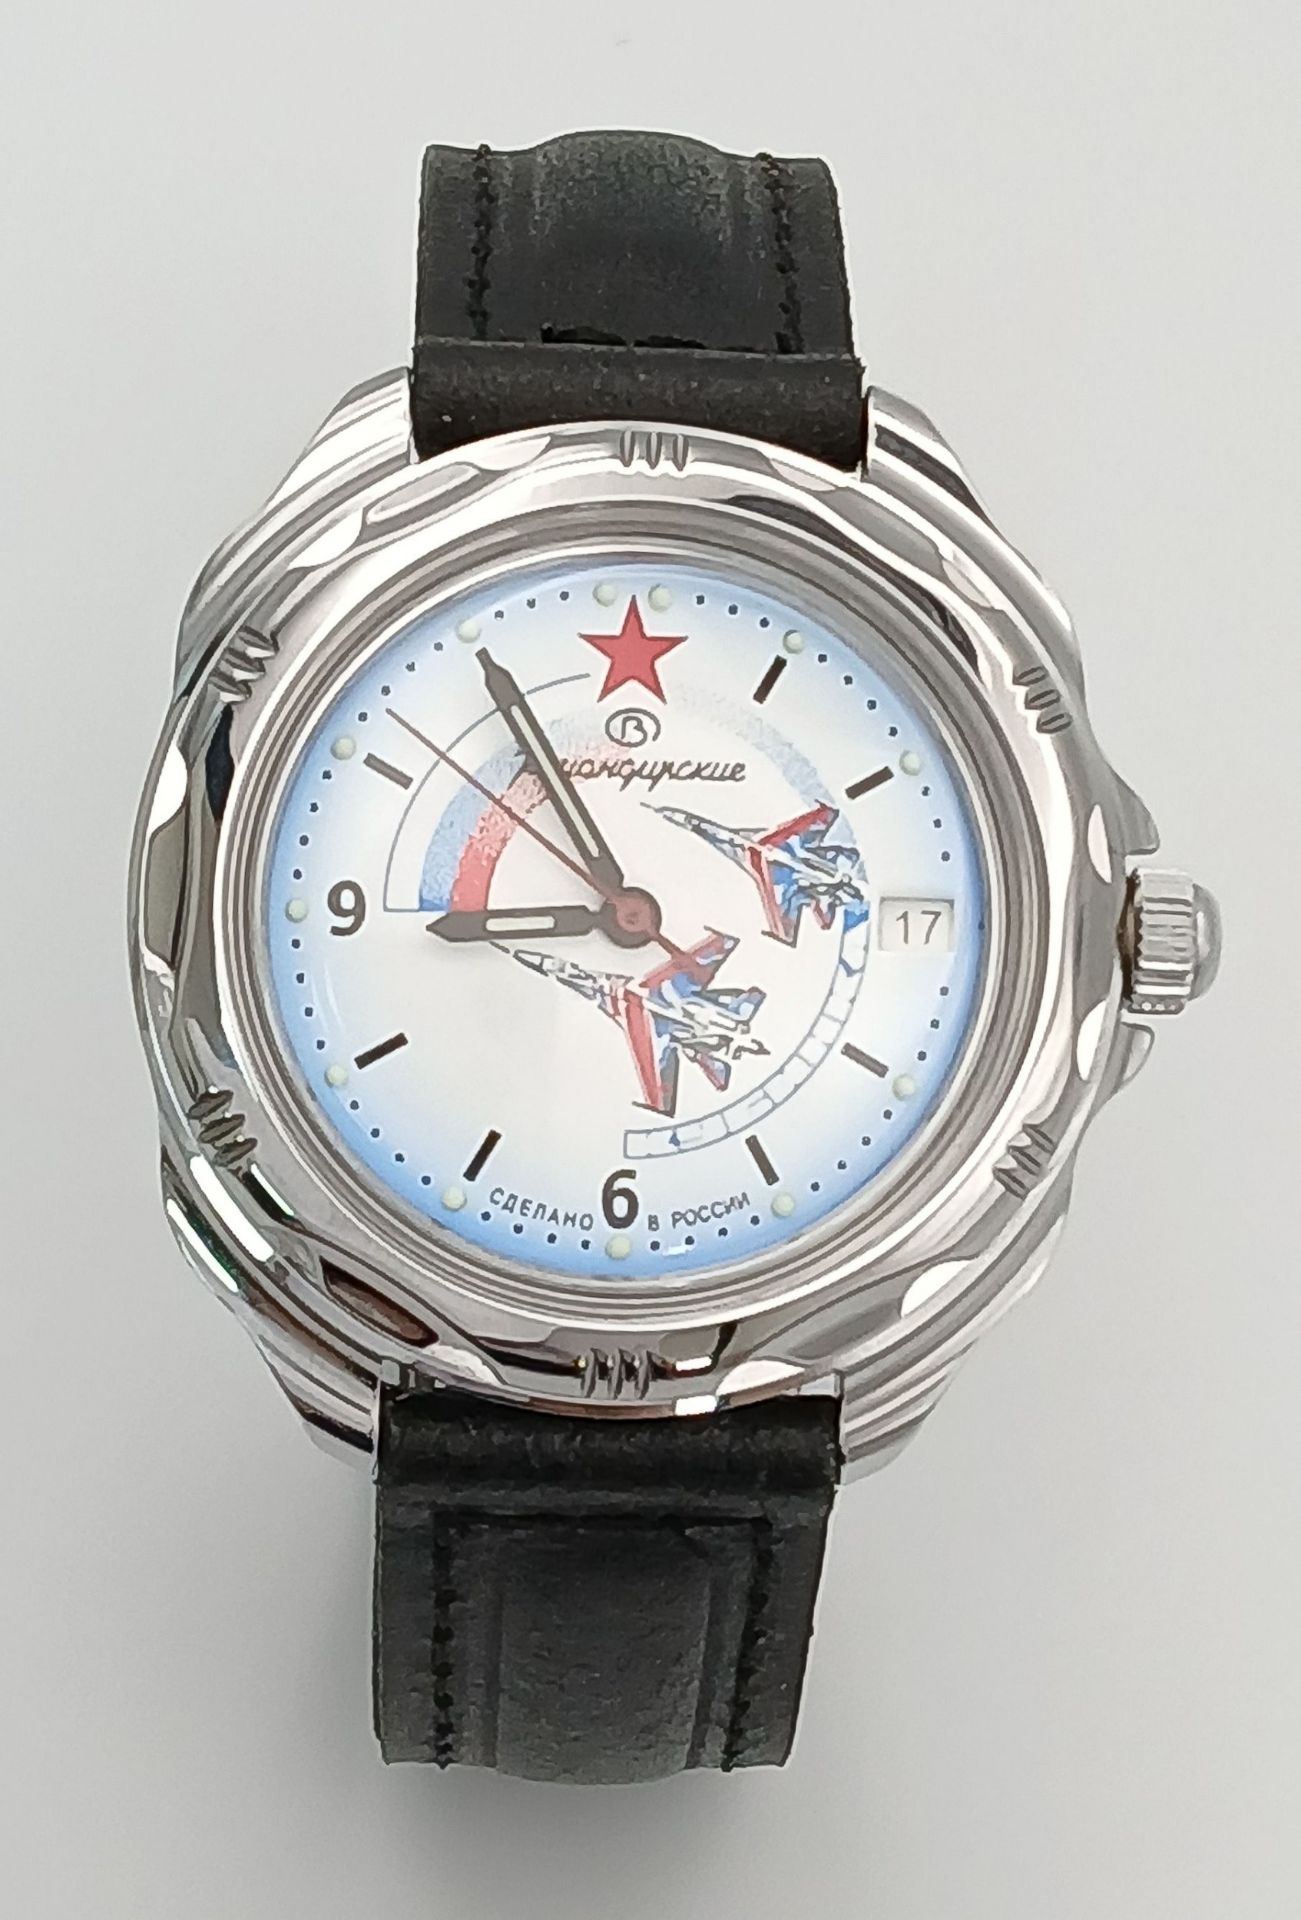 A Vostok Manual Gents Watch. Black leather strap. Stainless steel case - 40mm. White dial with date - Image 2 of 7